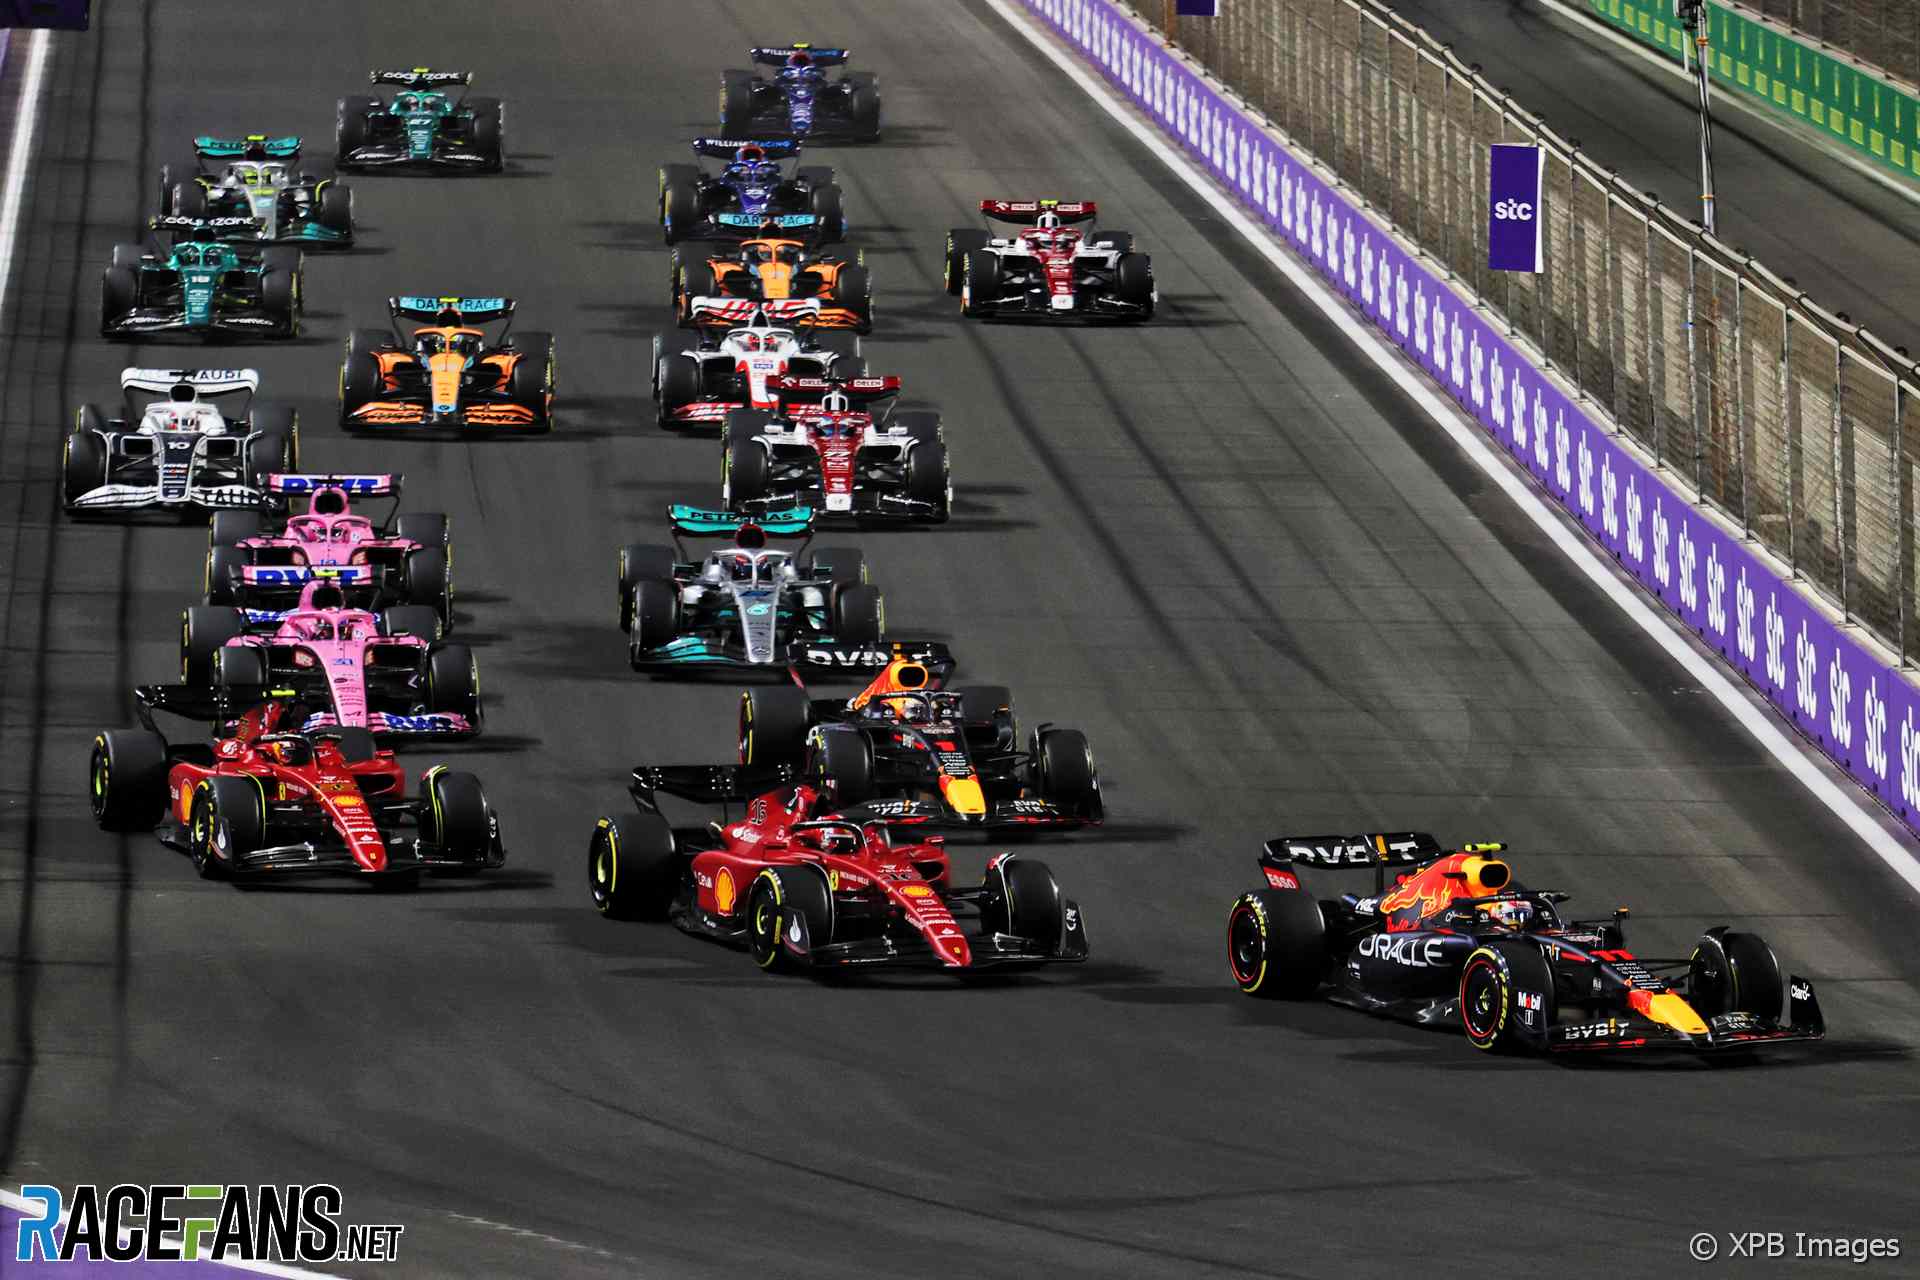 The 2022 Saudi Arabian Grand Prix was held at Jeddah Corniche Circuit and won by Max Verstappen